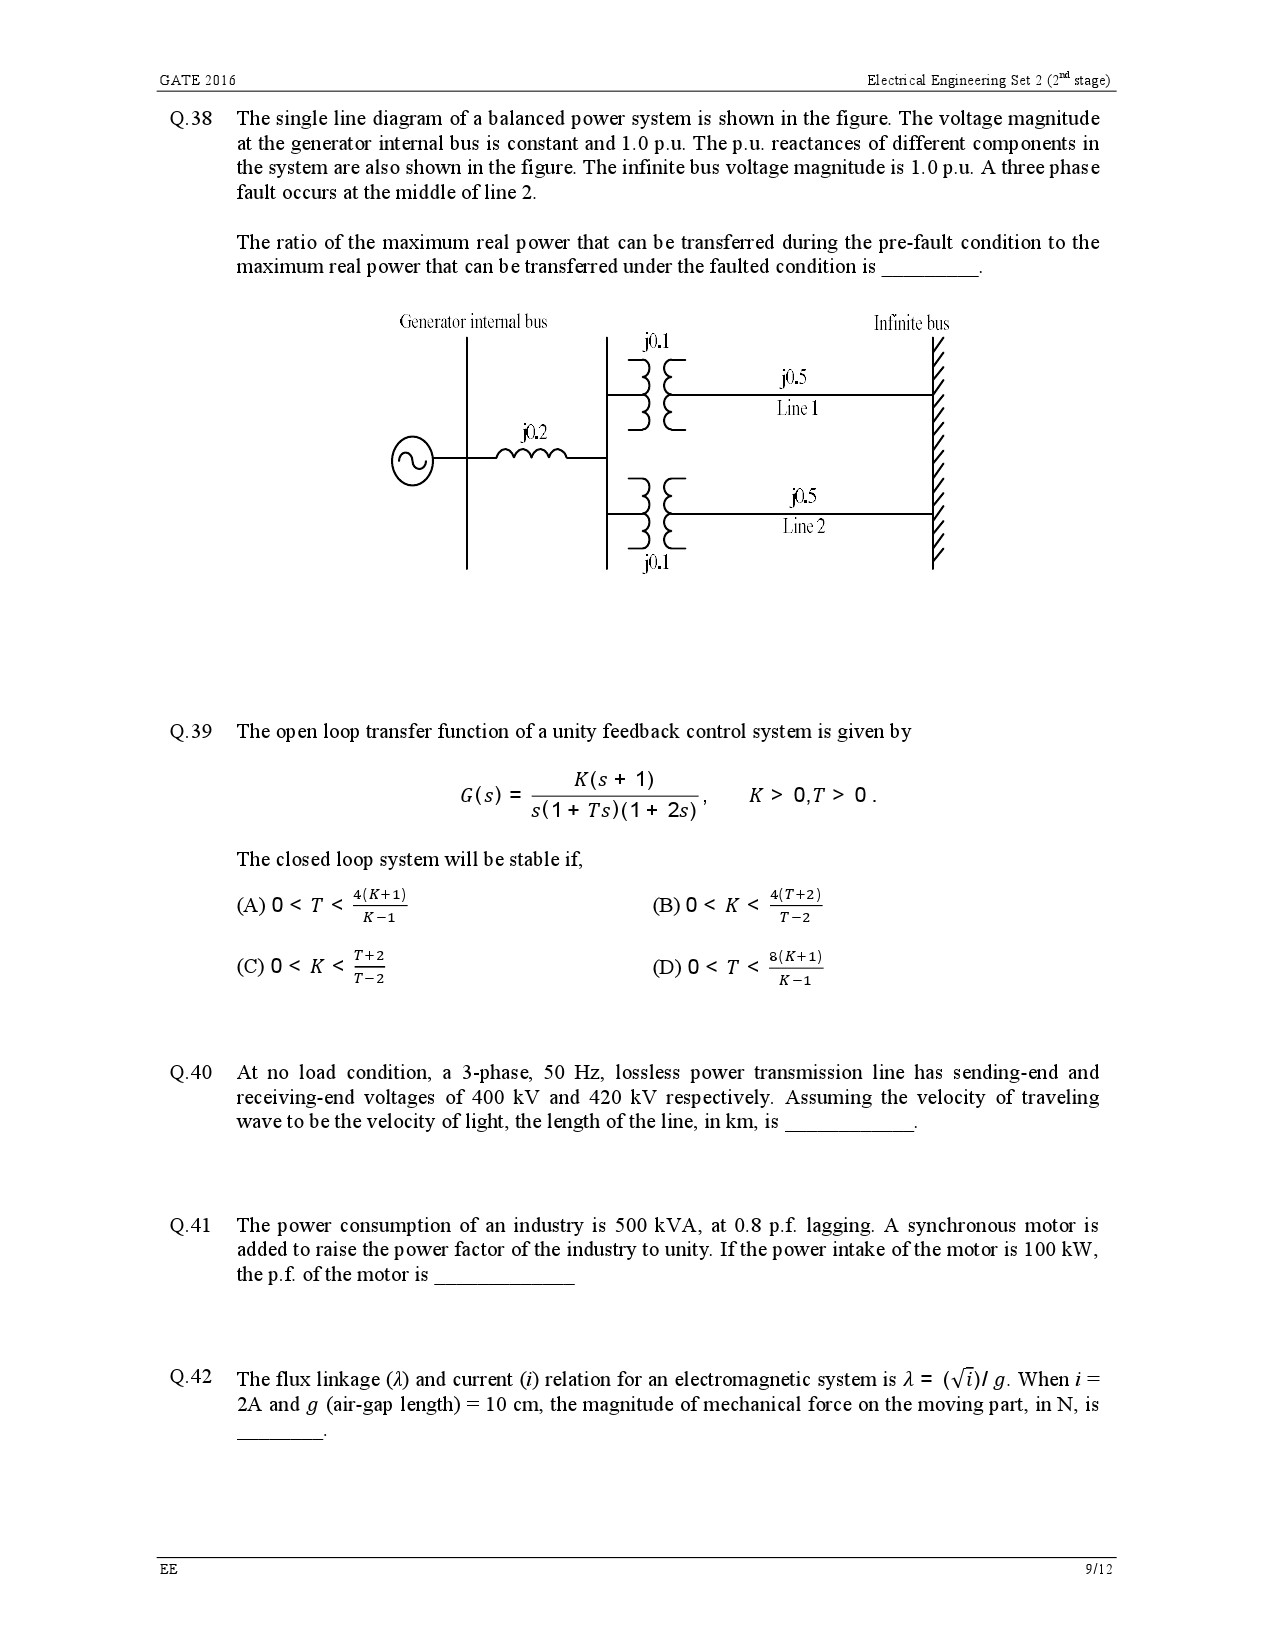 GATE Exam Question Paper 2016 Electrical Engineering Set 2 12